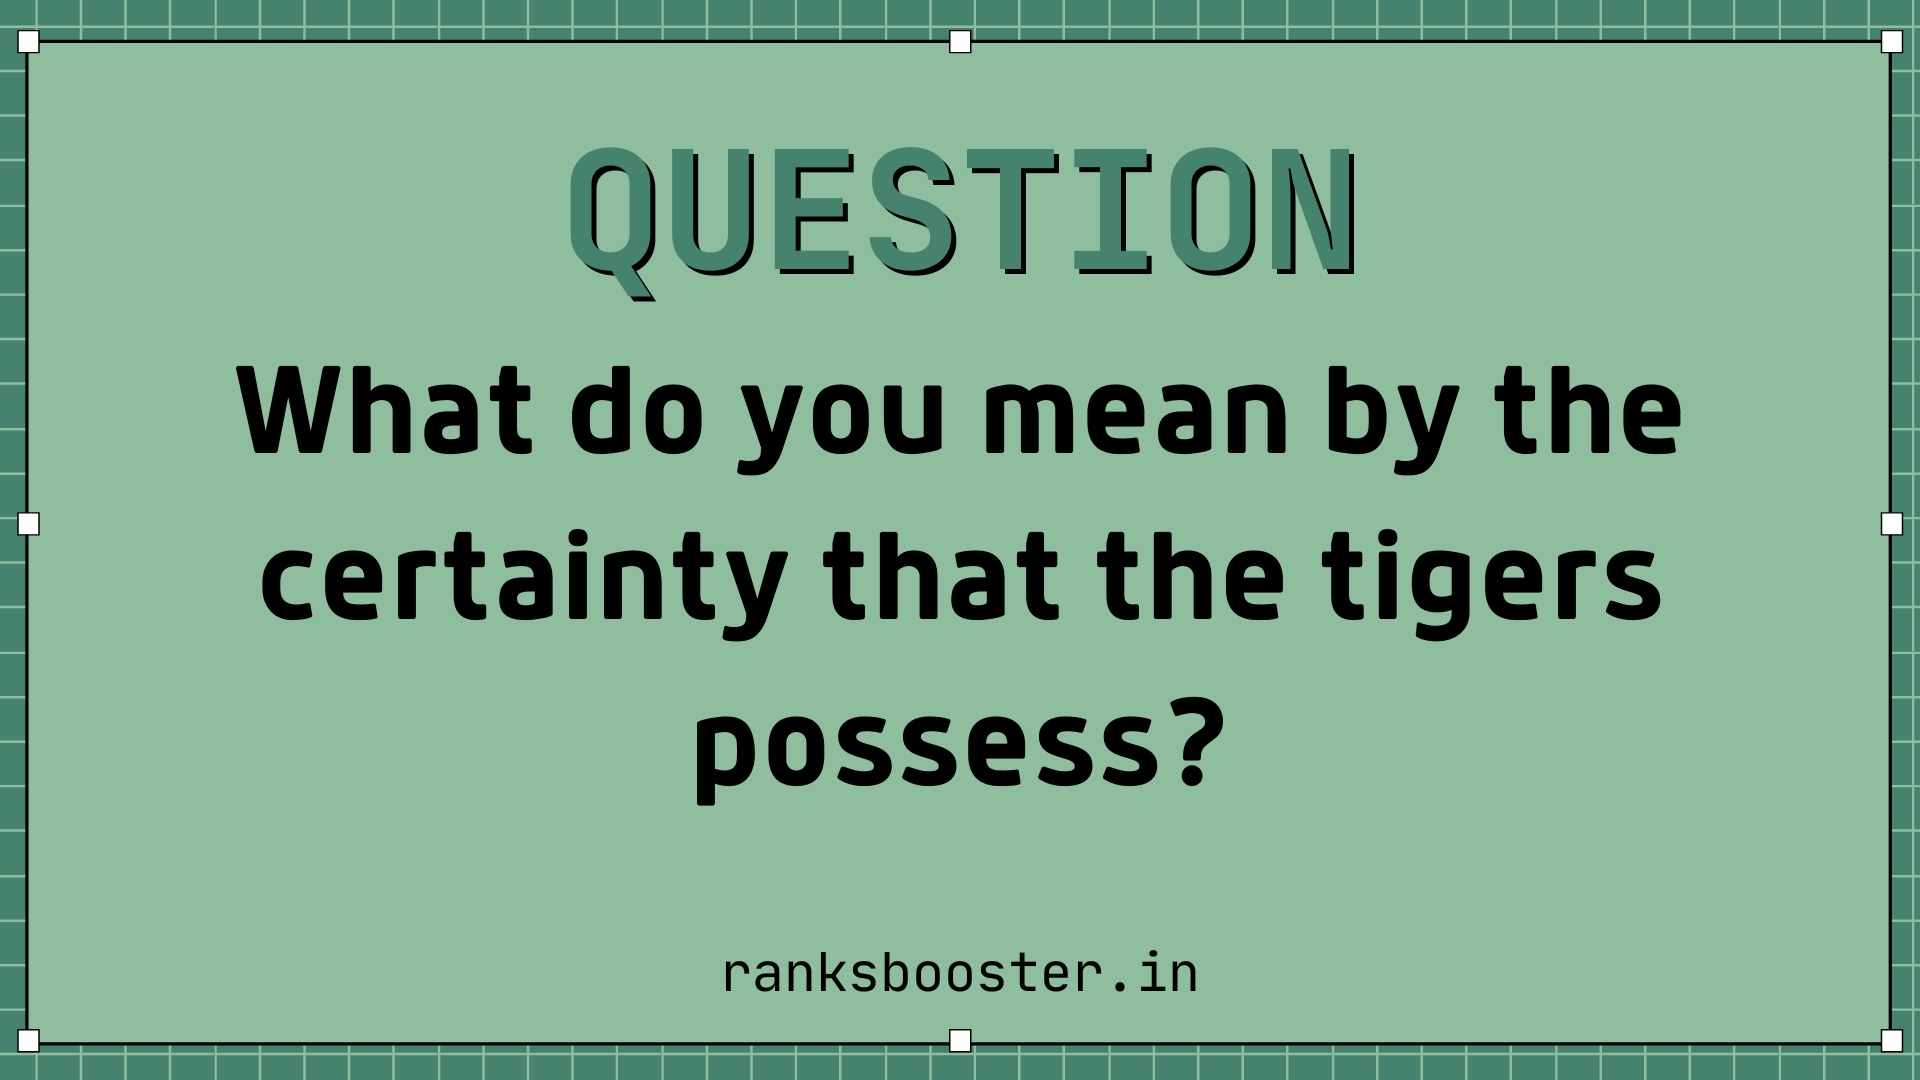 What do you mean by the certainty that the tigers possess?